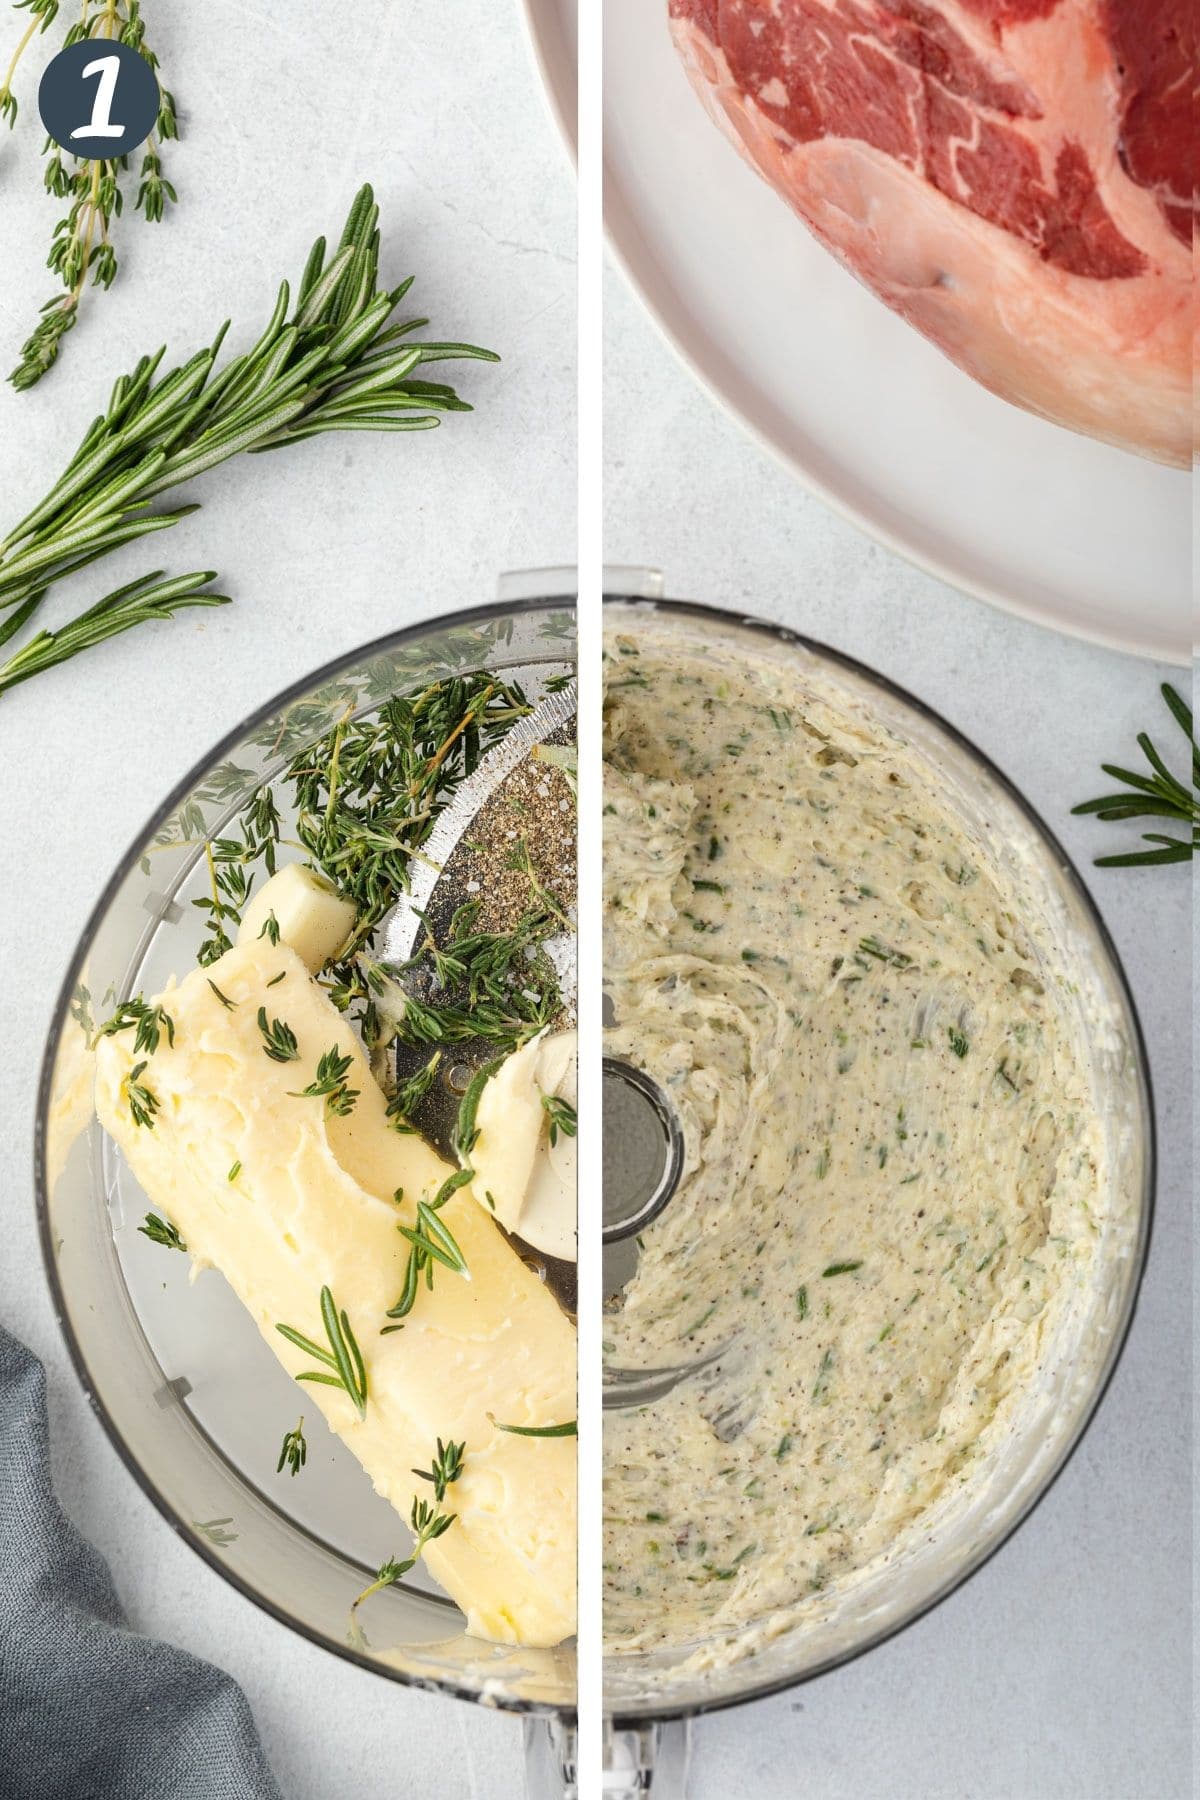 Butter, herbs, and garlic in a food processor.